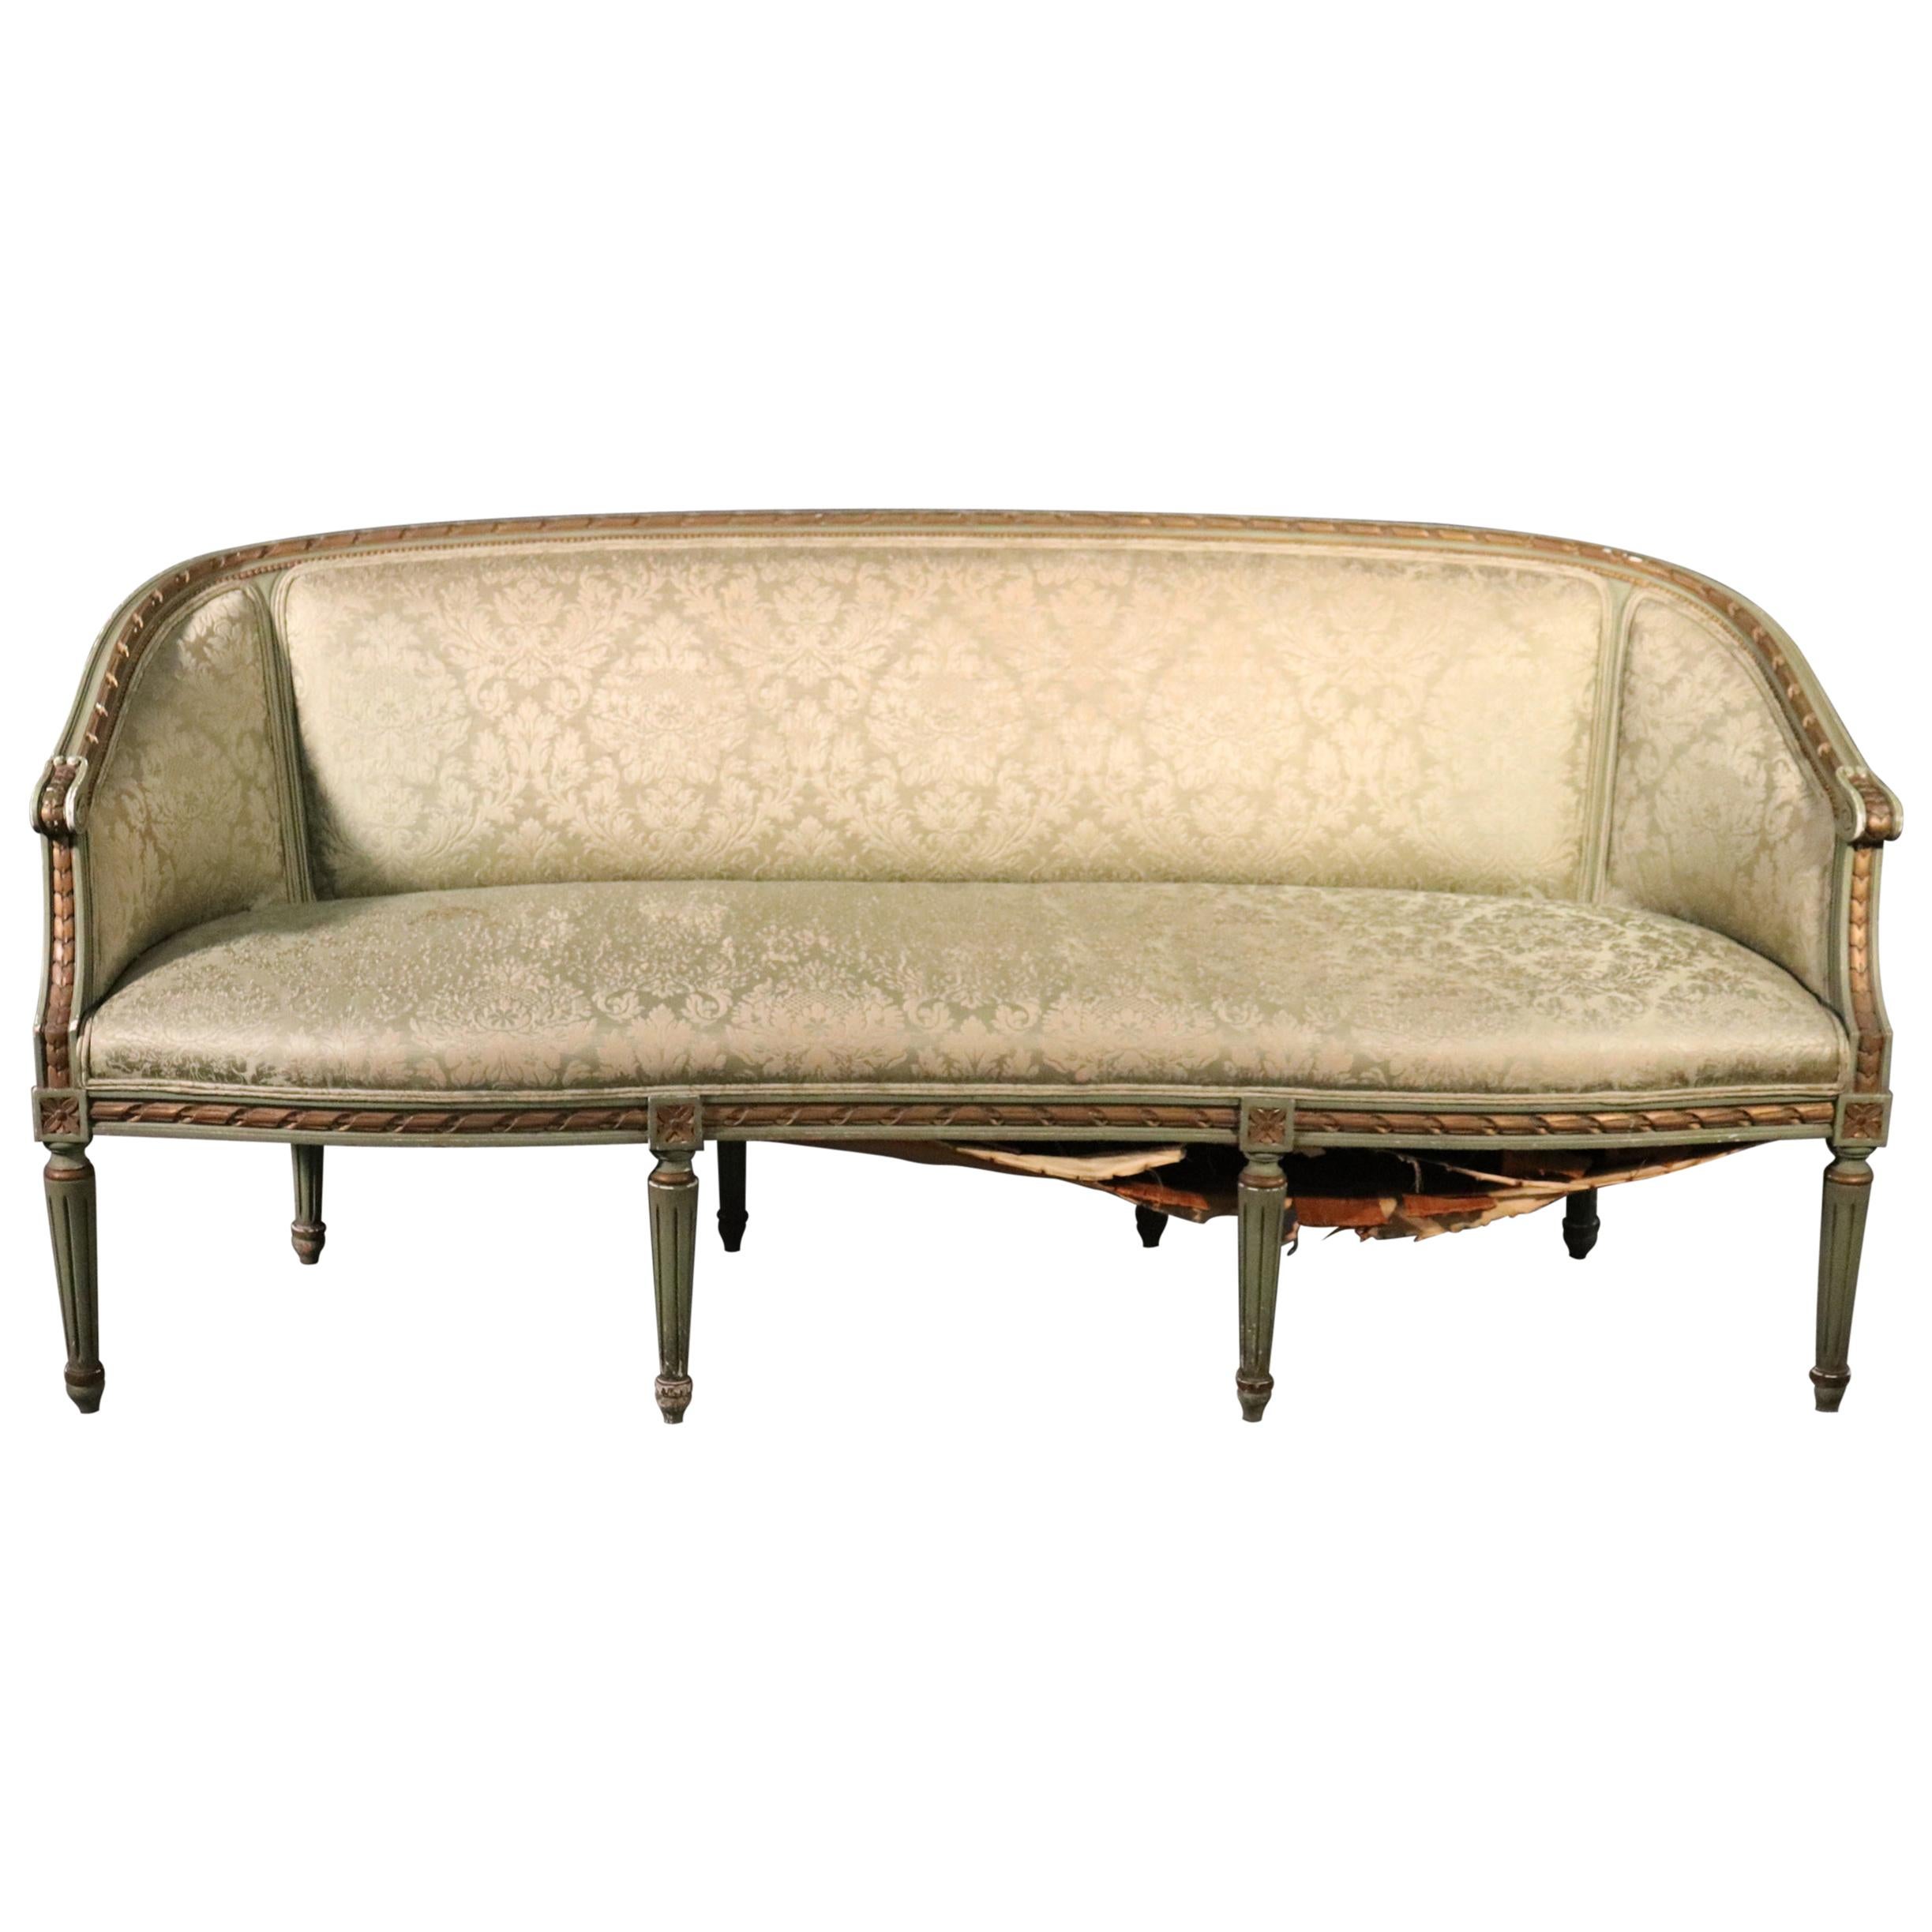 Paint Decorated Gilded French Louis XVI Style Settee Canape Sofa, Circa 1950